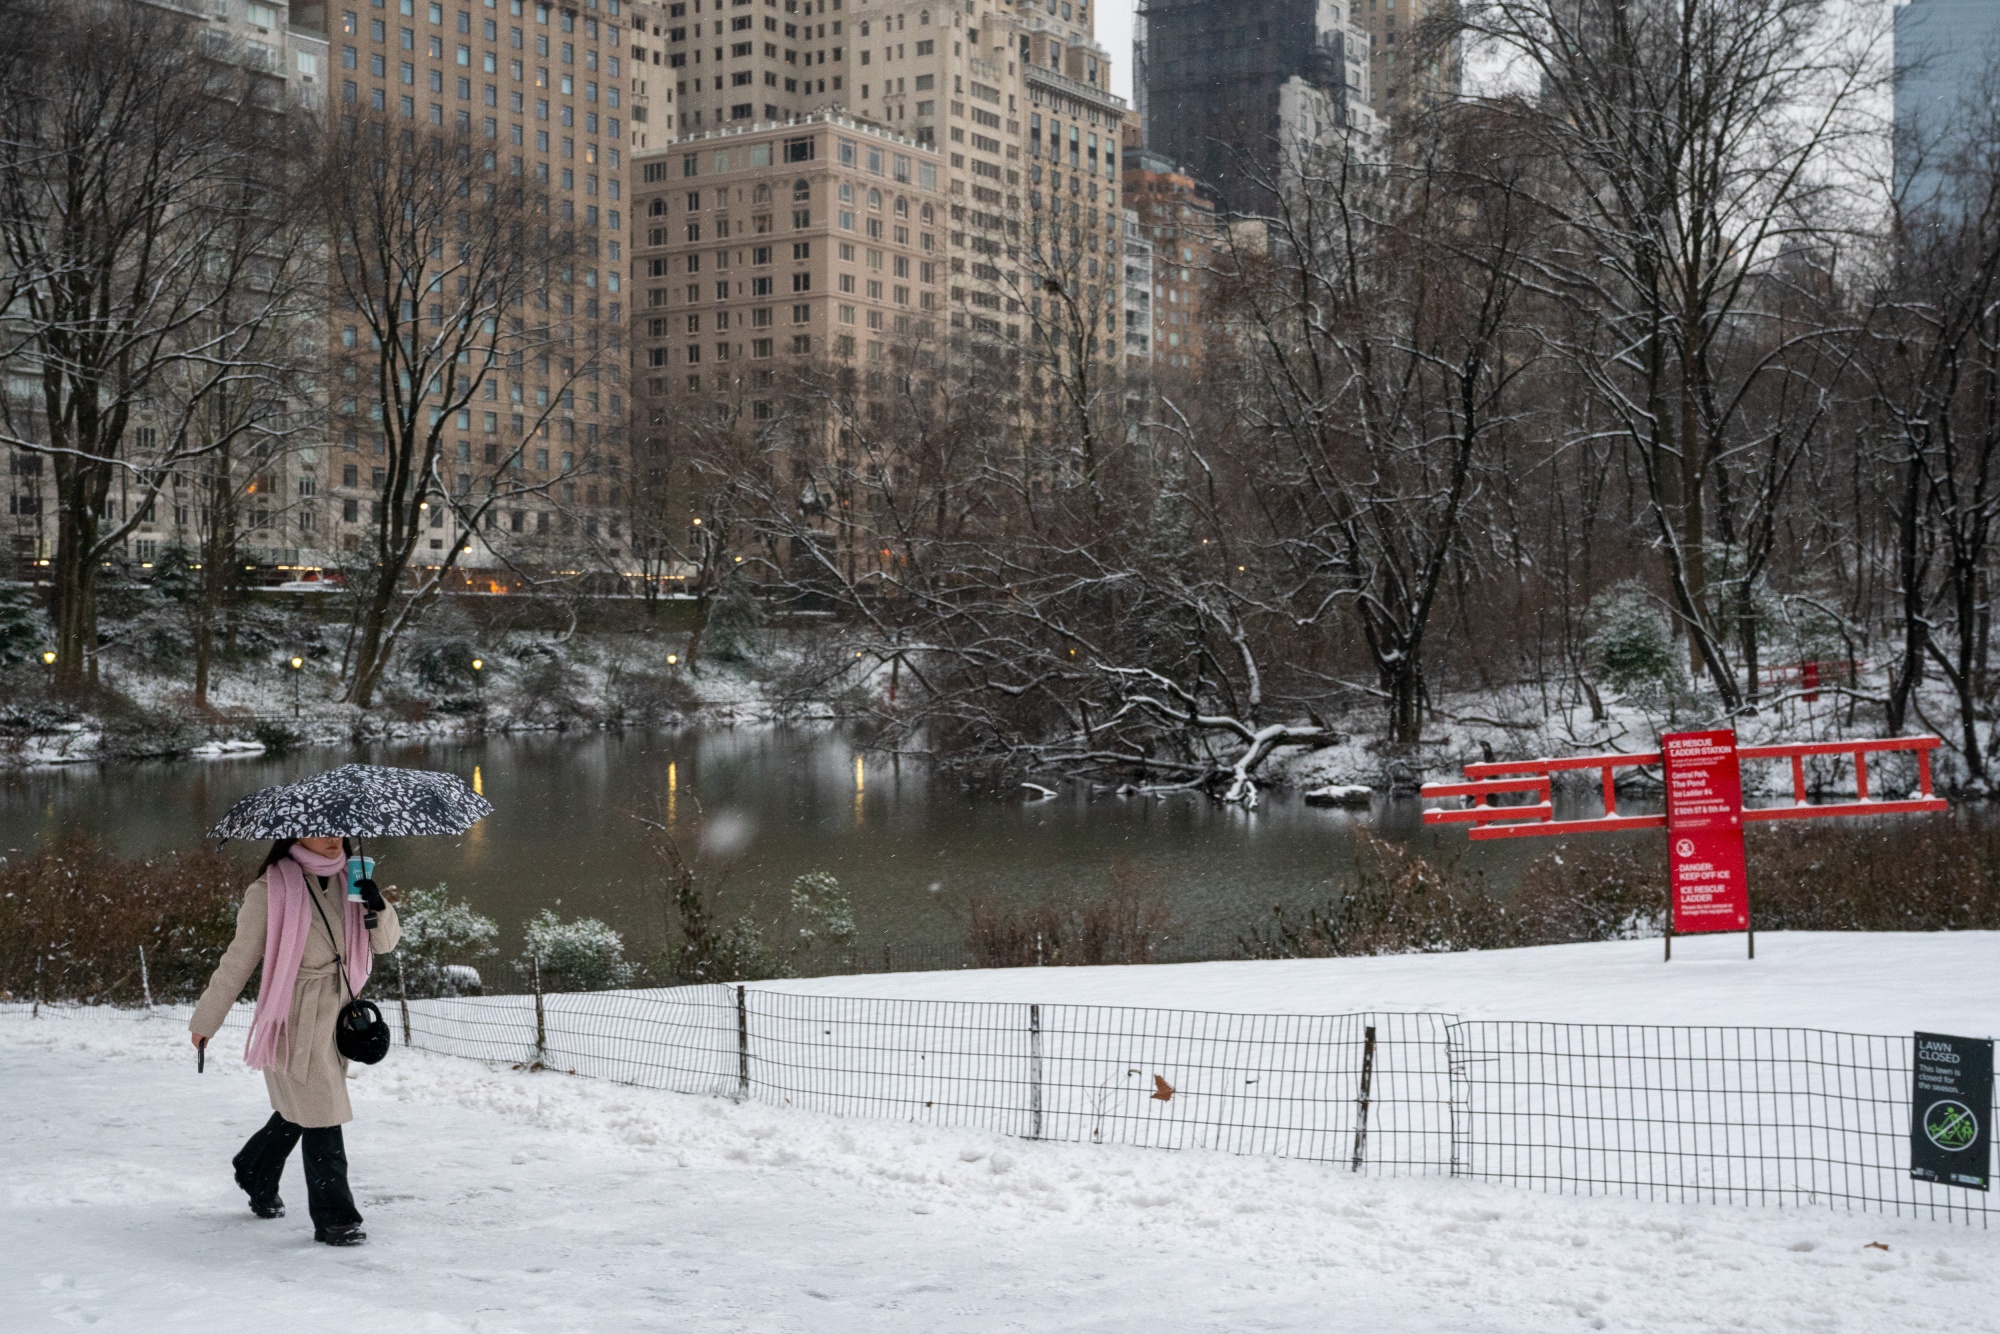 Snow at record low in U.S., elsewhere in North America - The